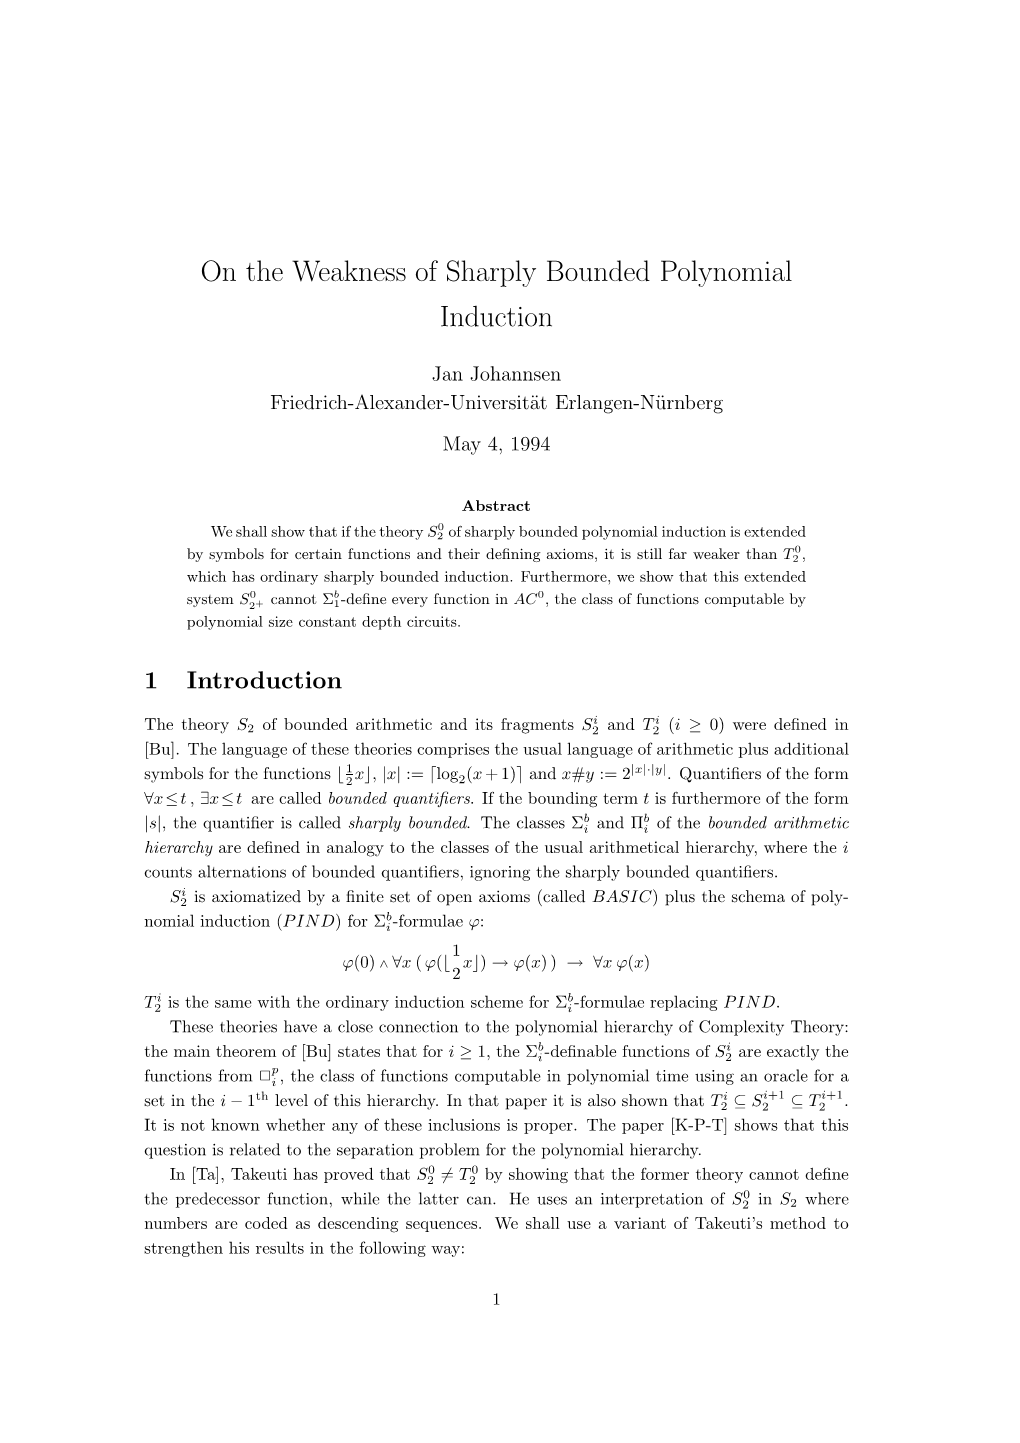 On the Weakness of Sharply Bounded Polynomial Induction